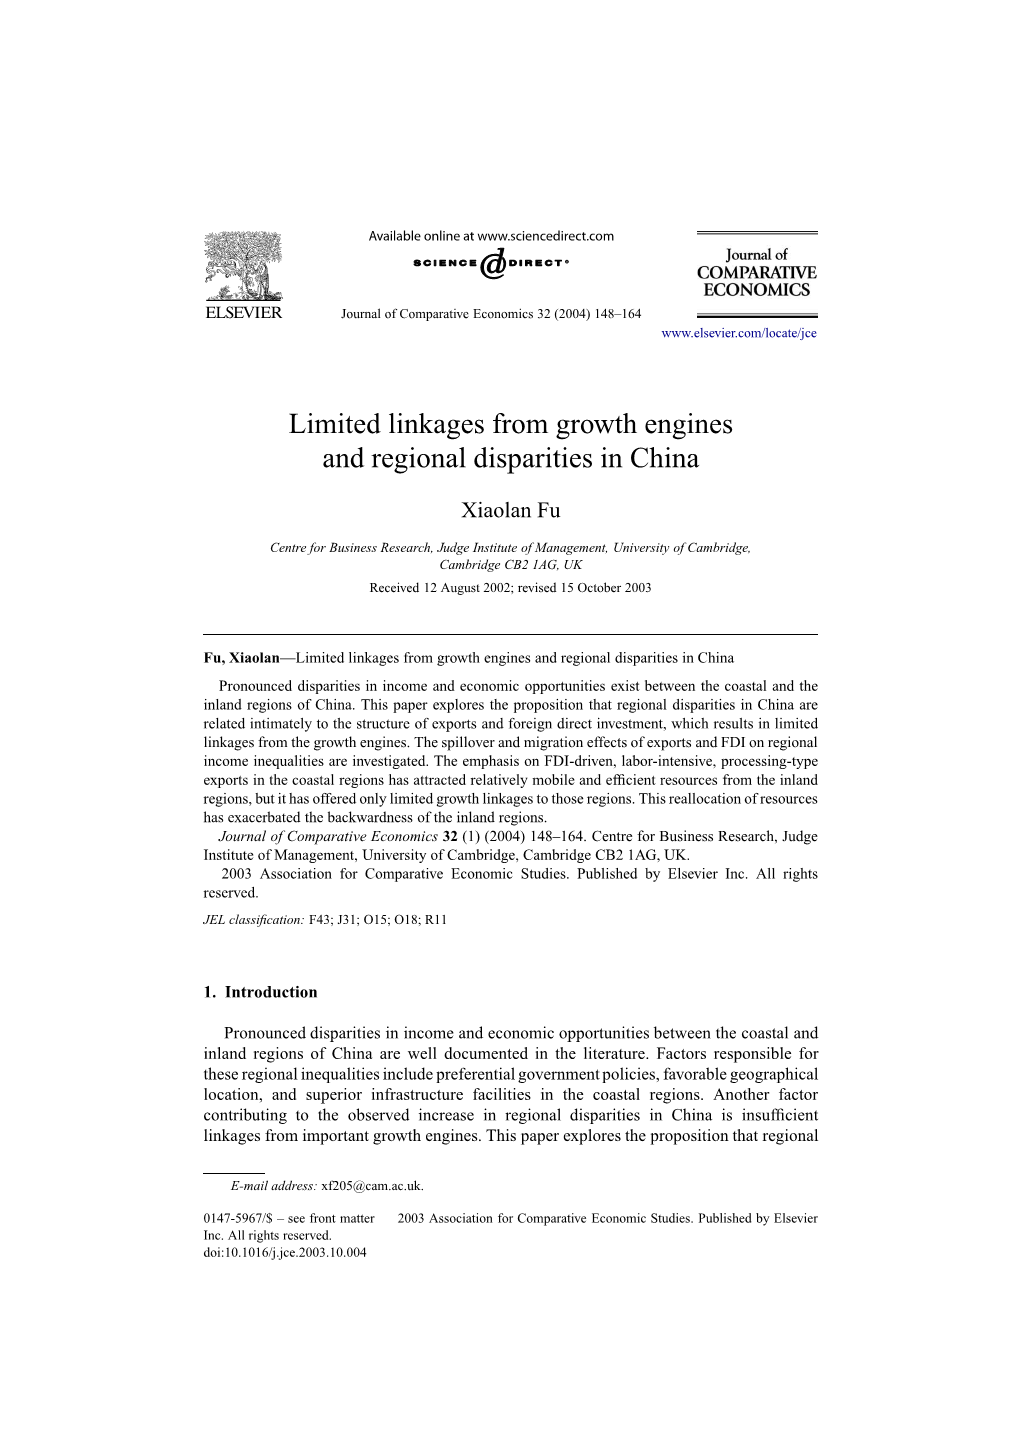 Limited Linkages from Growth Engines and Regional Disparities in China